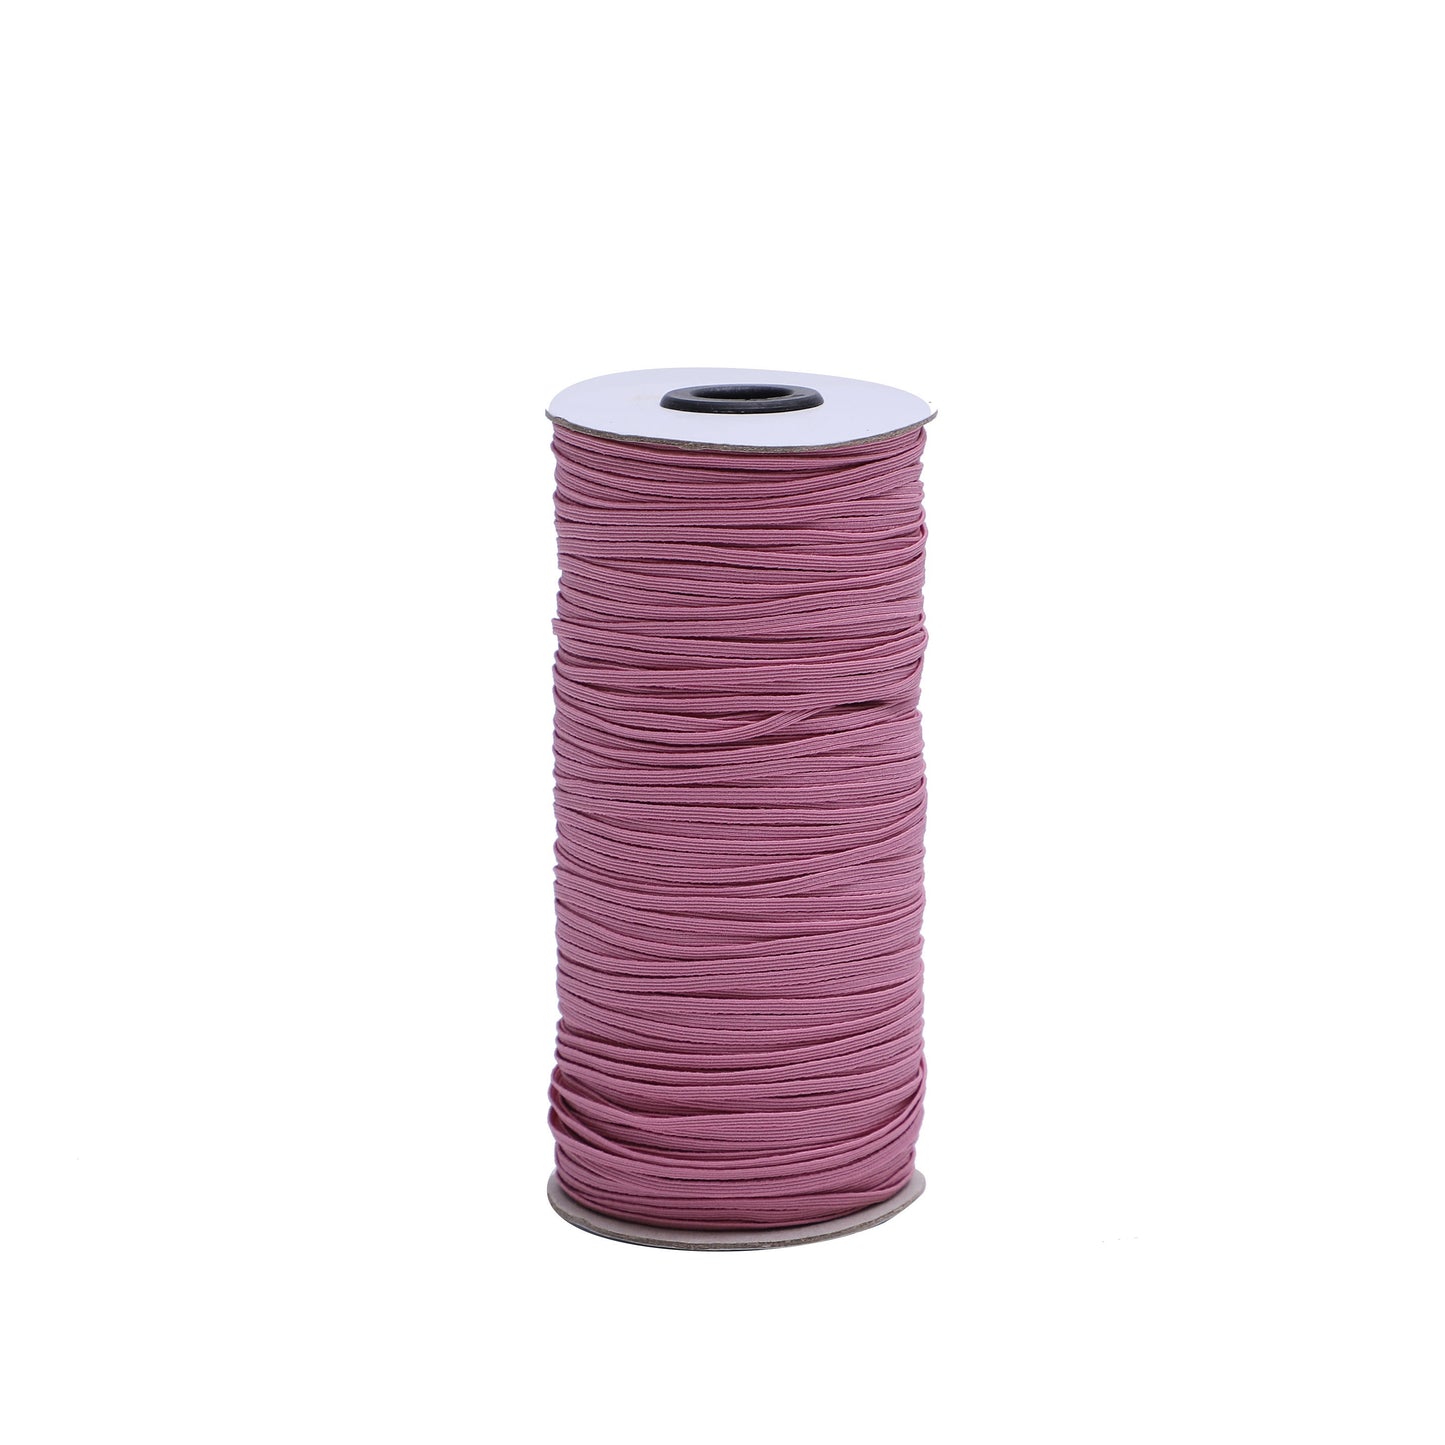 Mauve 1/8 inch Elastic Roll - Elastic for Face Mask - Skinny Elastic - Elastic by the yard Thin Elastic for Face Mask 3 mm Rope Cord